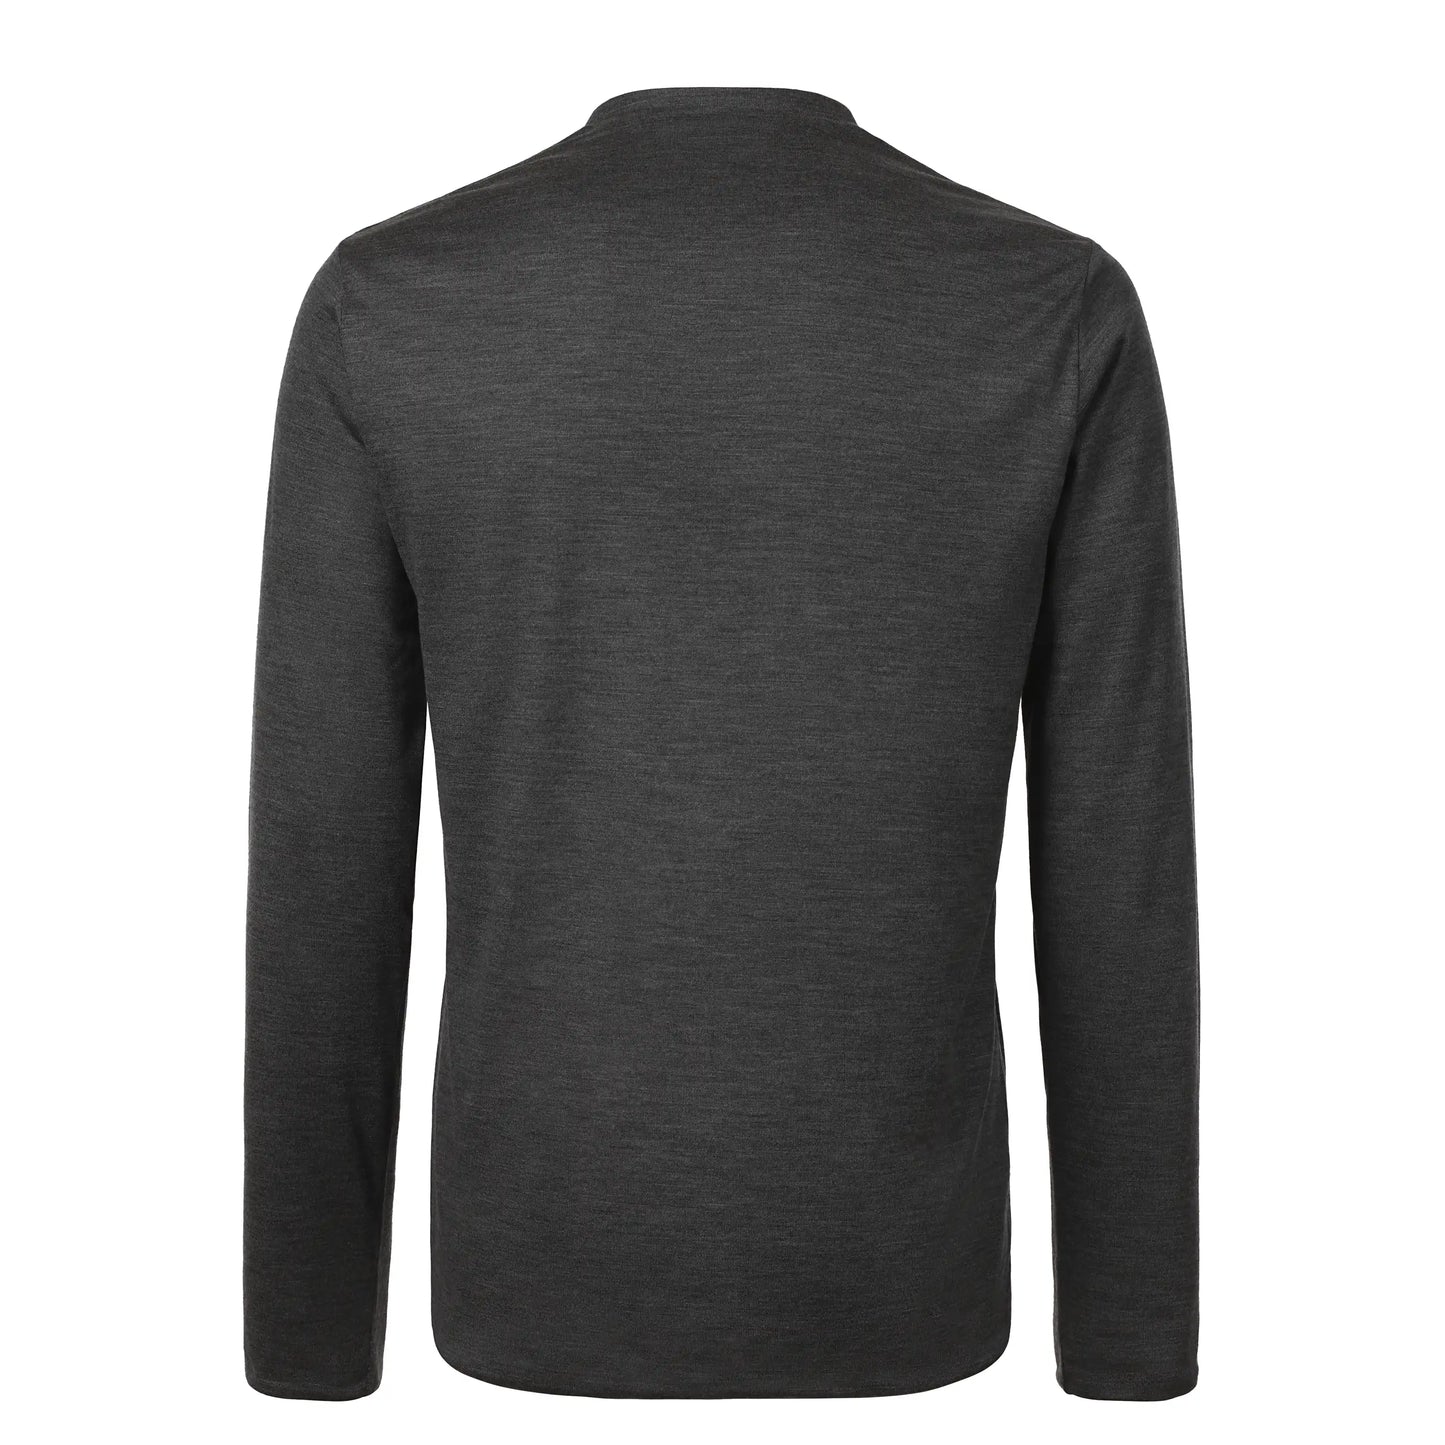 Wool and Cotton Reversible Long Sleeve